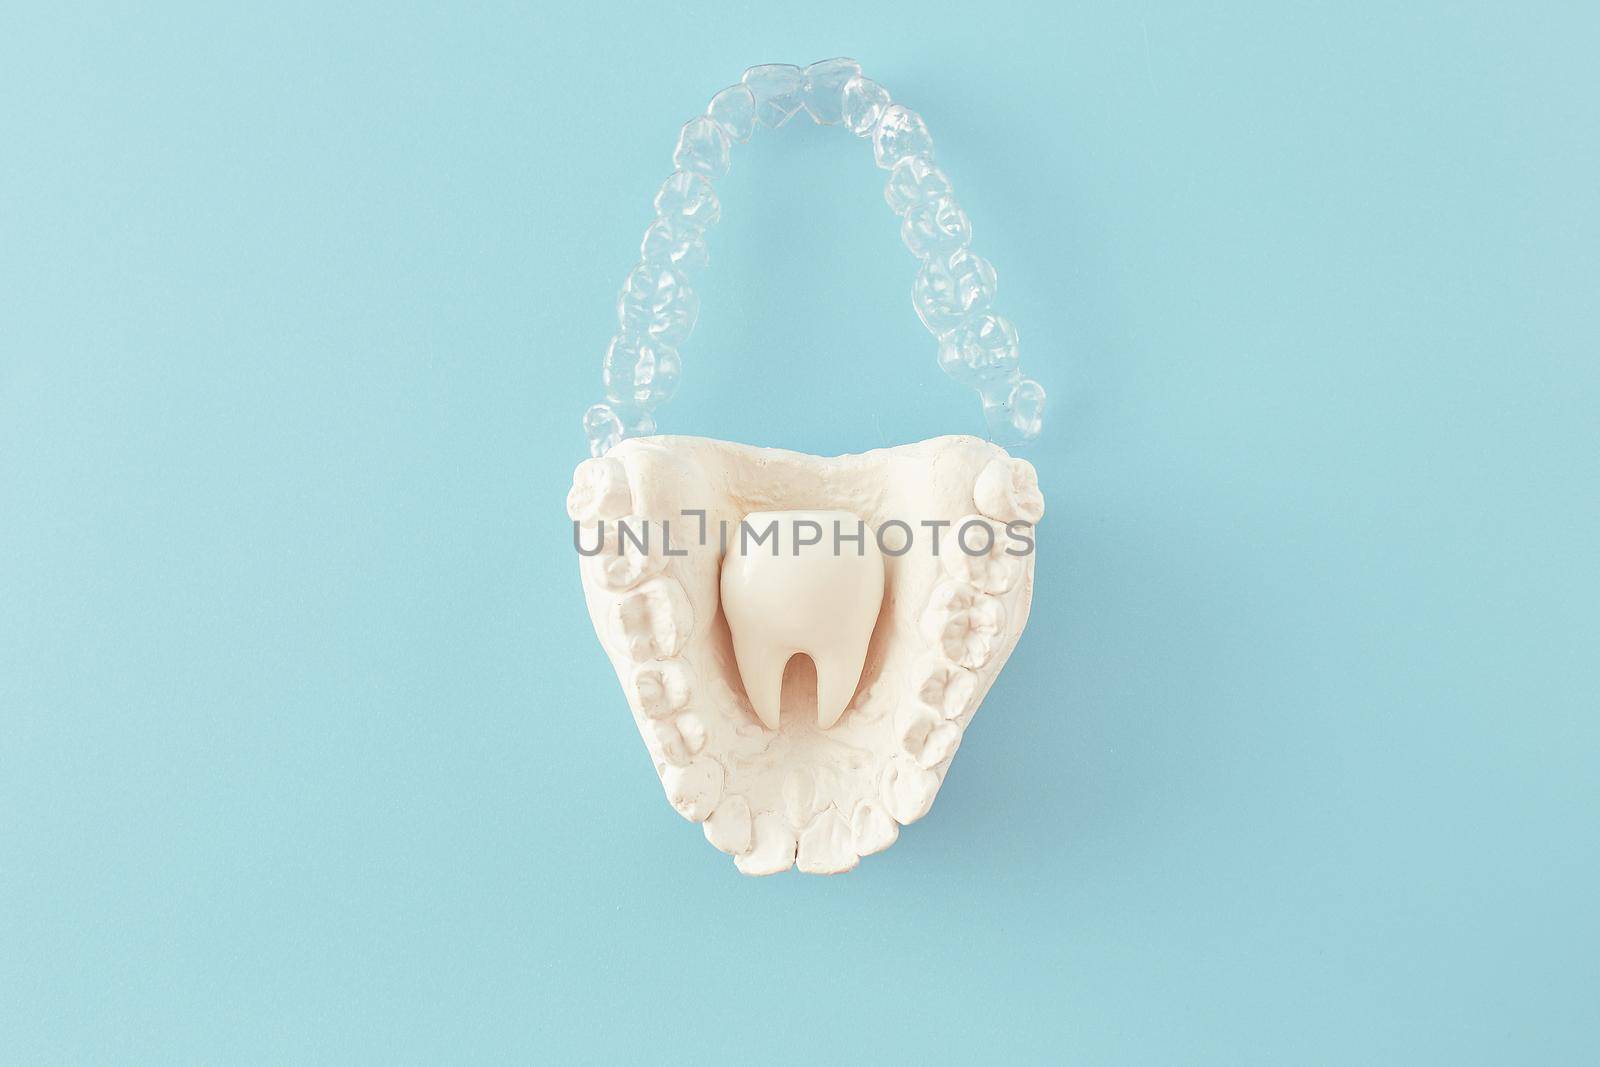 Orthodontic dental theme on blue  background.Transparent invisible dental aligners or braces aplicable for an orthodontic dental treatment